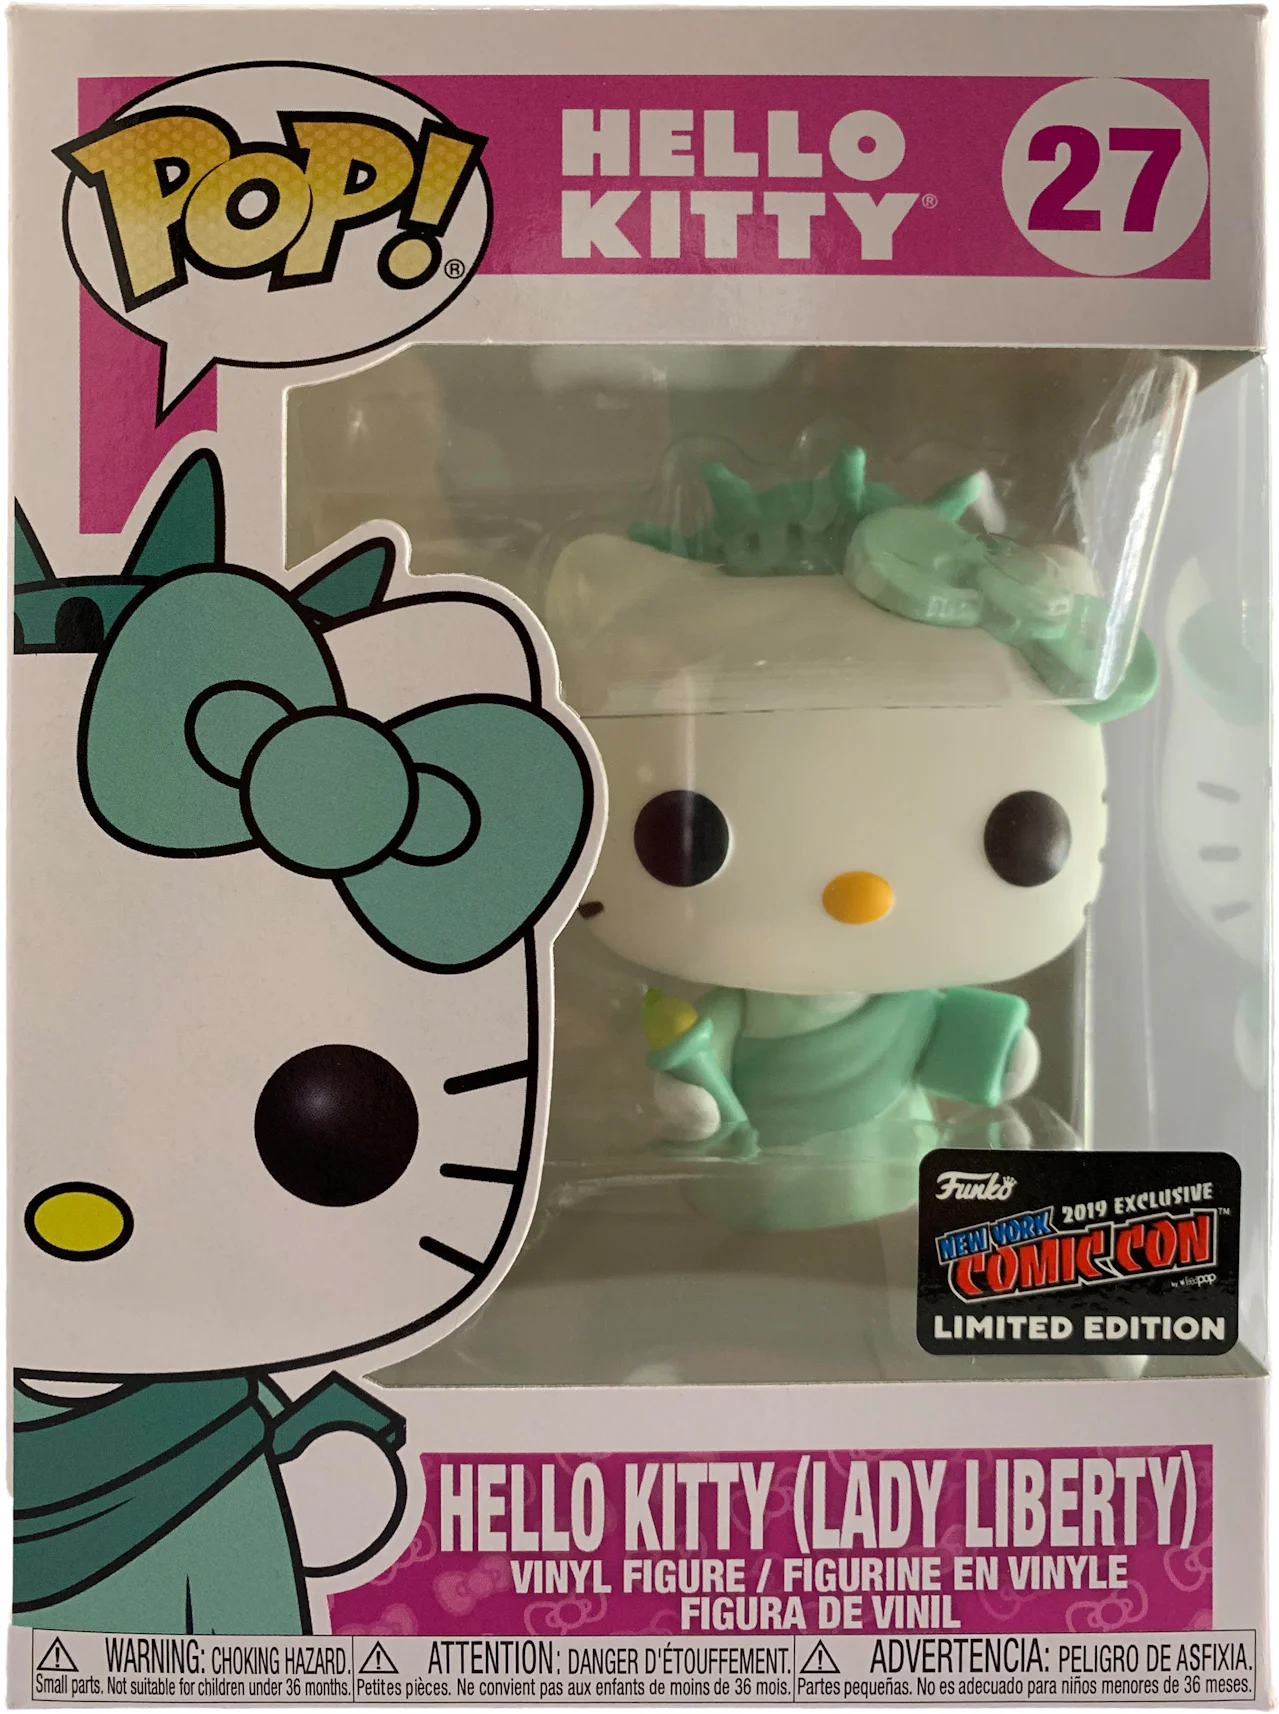 https://images.stockx.com/images/Funko-Pop-Hello-Kitty-Hello-Kitty-Lady-Liberty-NYCC-Figure-27.jpg?fit=fill&bg=FFFFFF&w=1200&h=857&fm=webp&auto=compress&dpr=2&trim=color&updated_at=1620336359&q=60